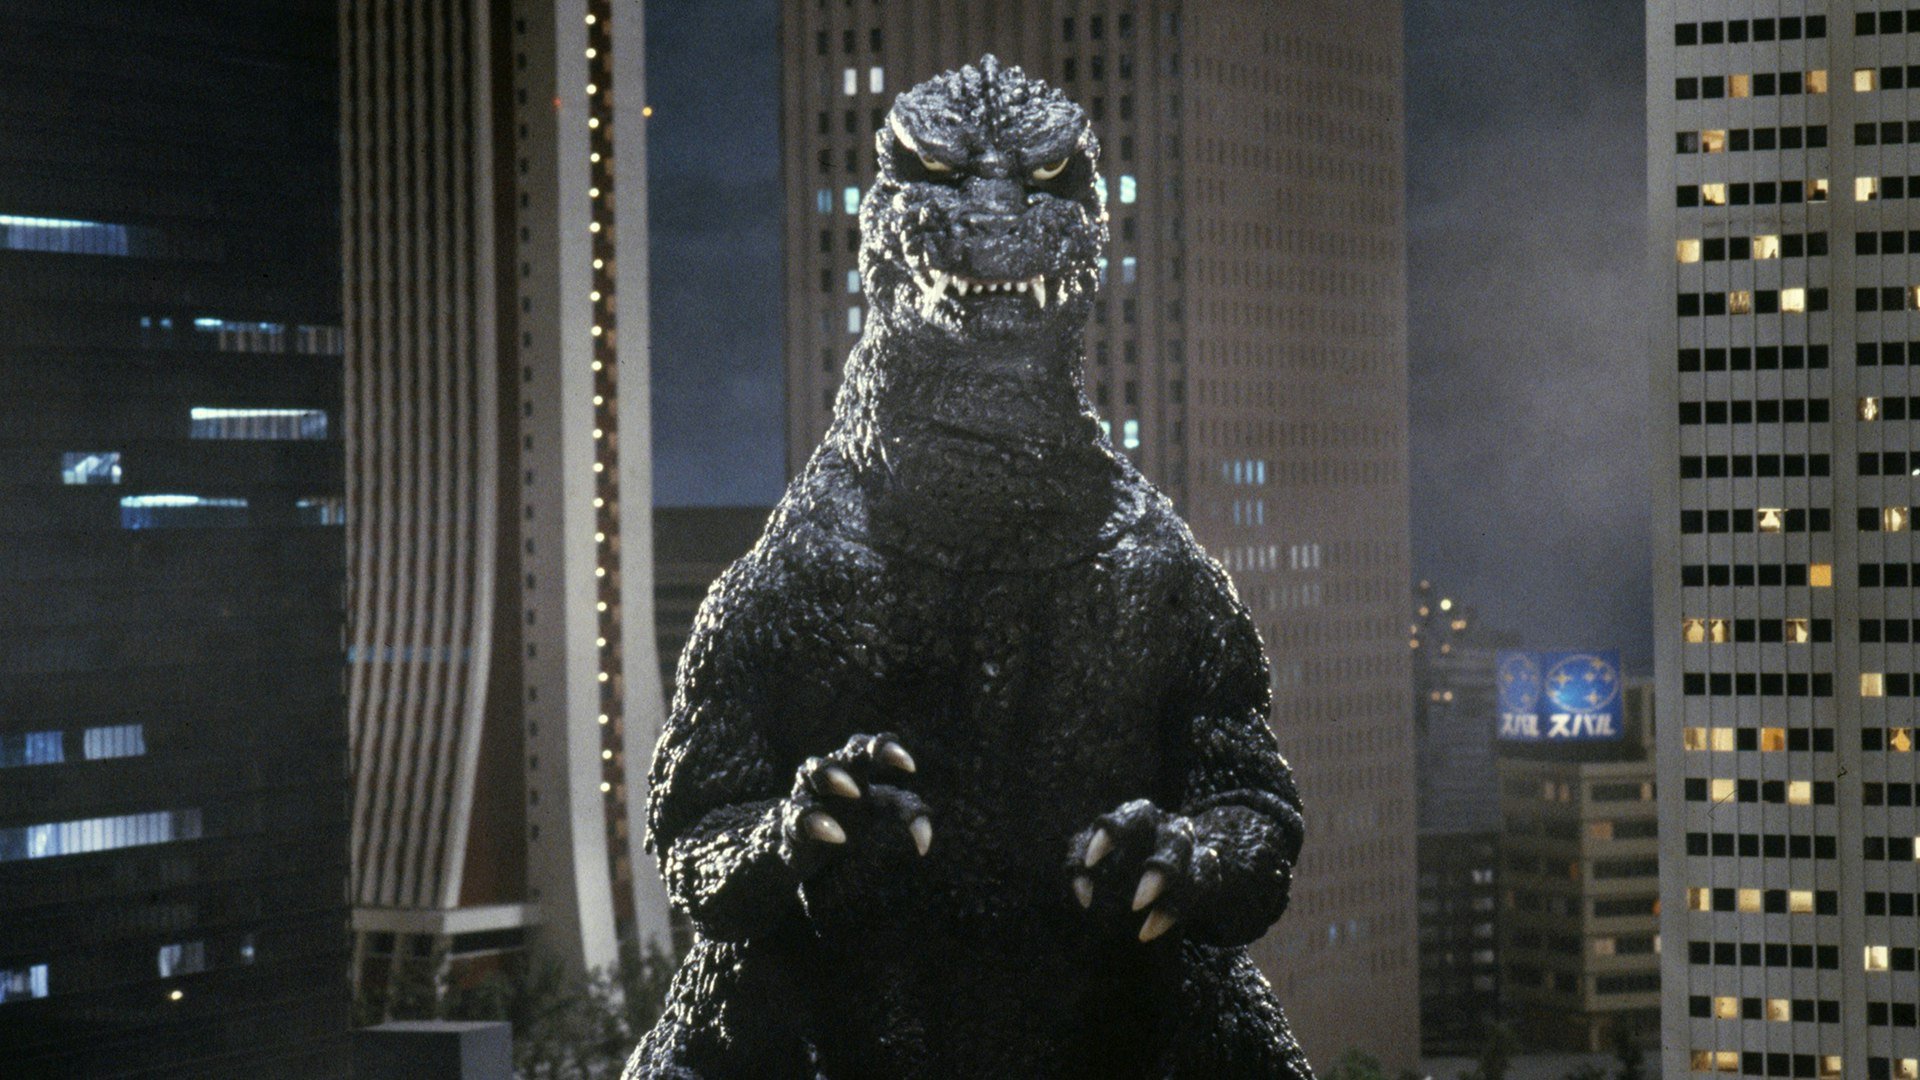 GODZILLA Heisei-Era Collection Coming To The Criterion Channel